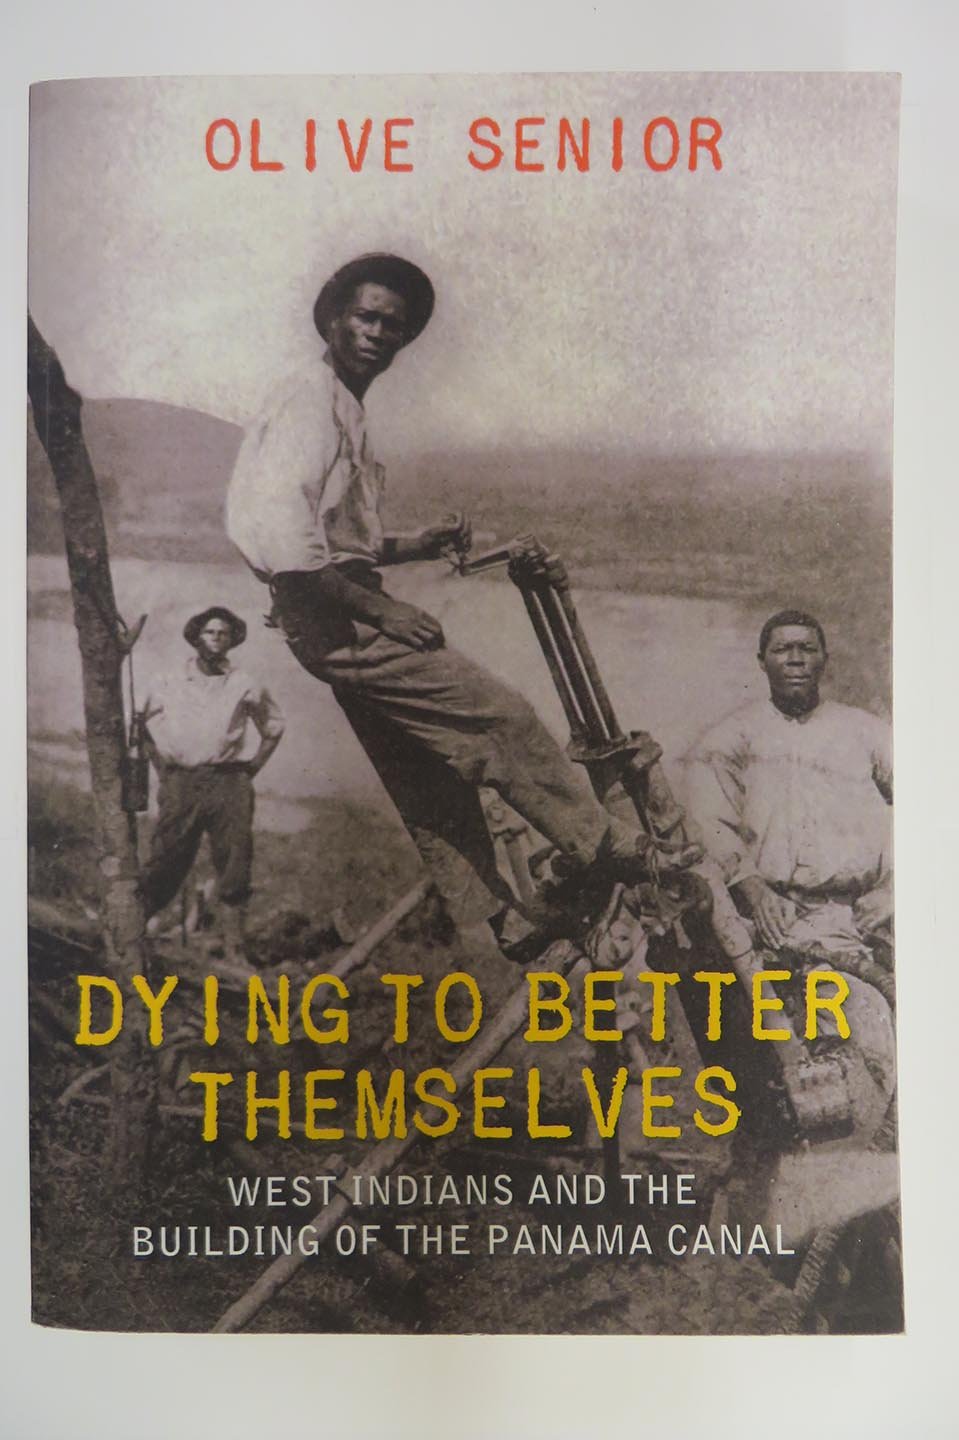 Dying to Better Themselves: West Indians and the Building of the Panama Canal